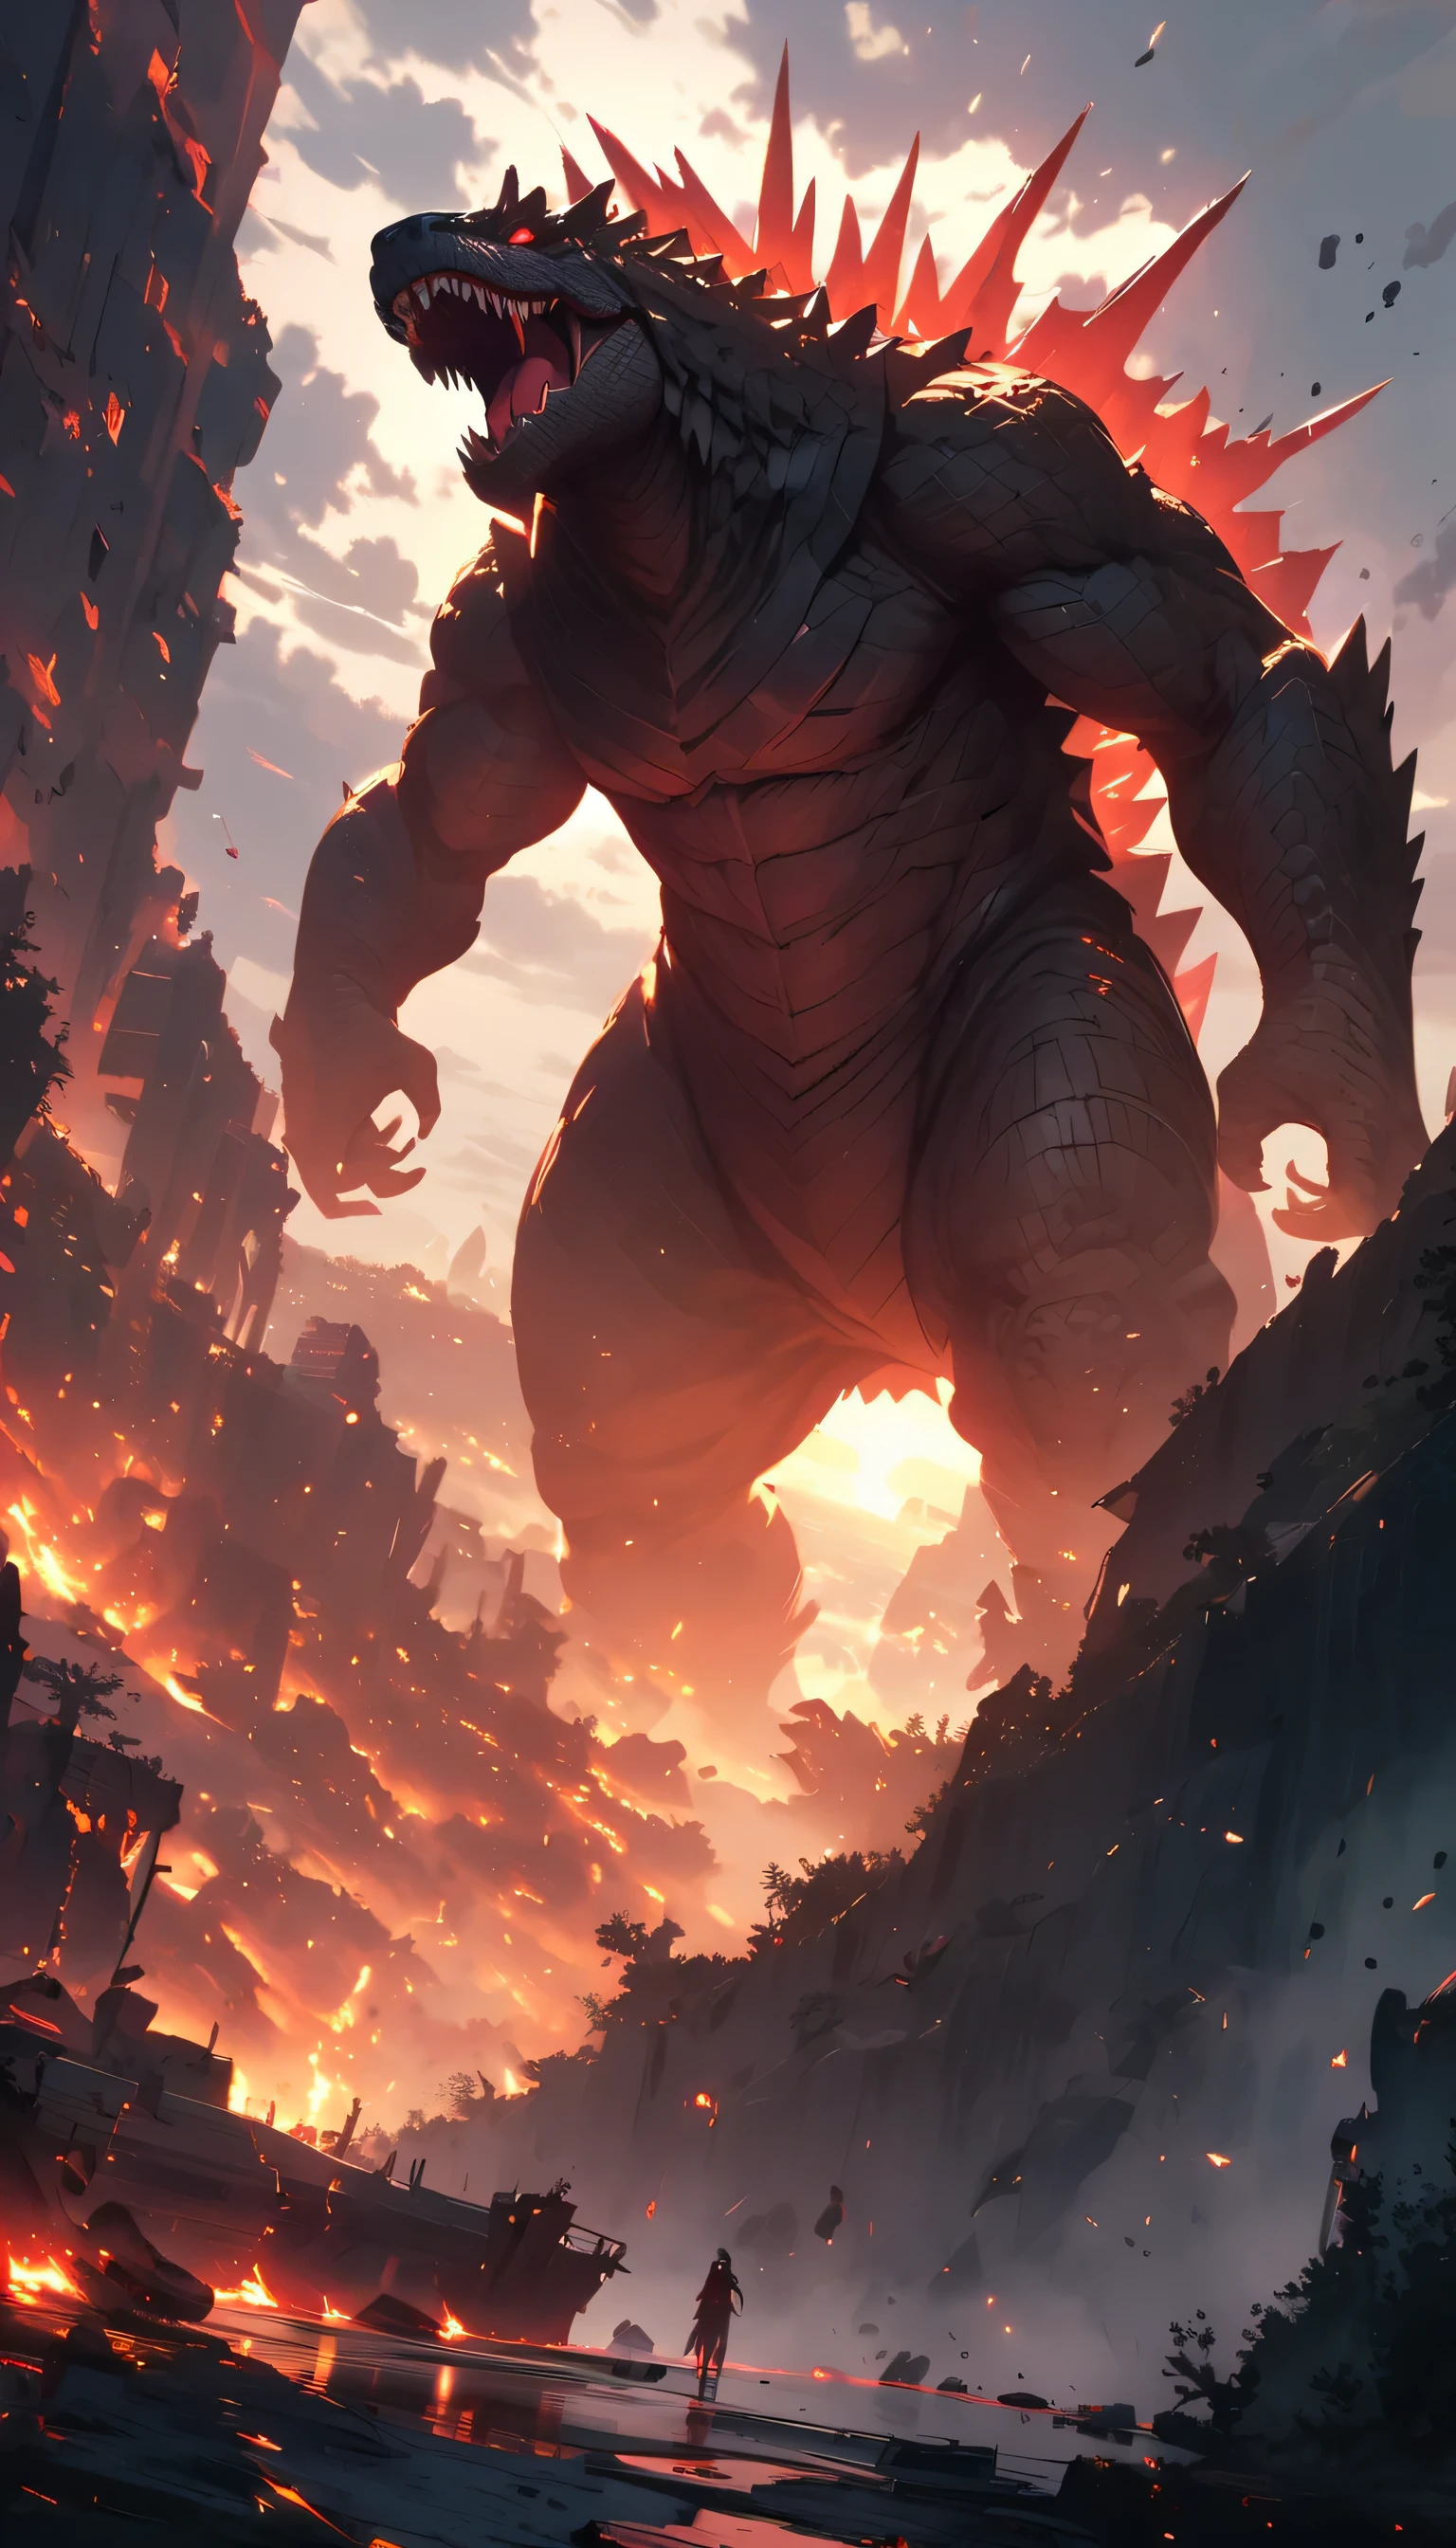 Imagine a colossal Godzilla, its silken body the size of a city, draped over a desolate landscape. Razor-sharp legs pierce the ruins below, while glowing red eyes scan for prey, reflecting the dying light of a shattered moon.